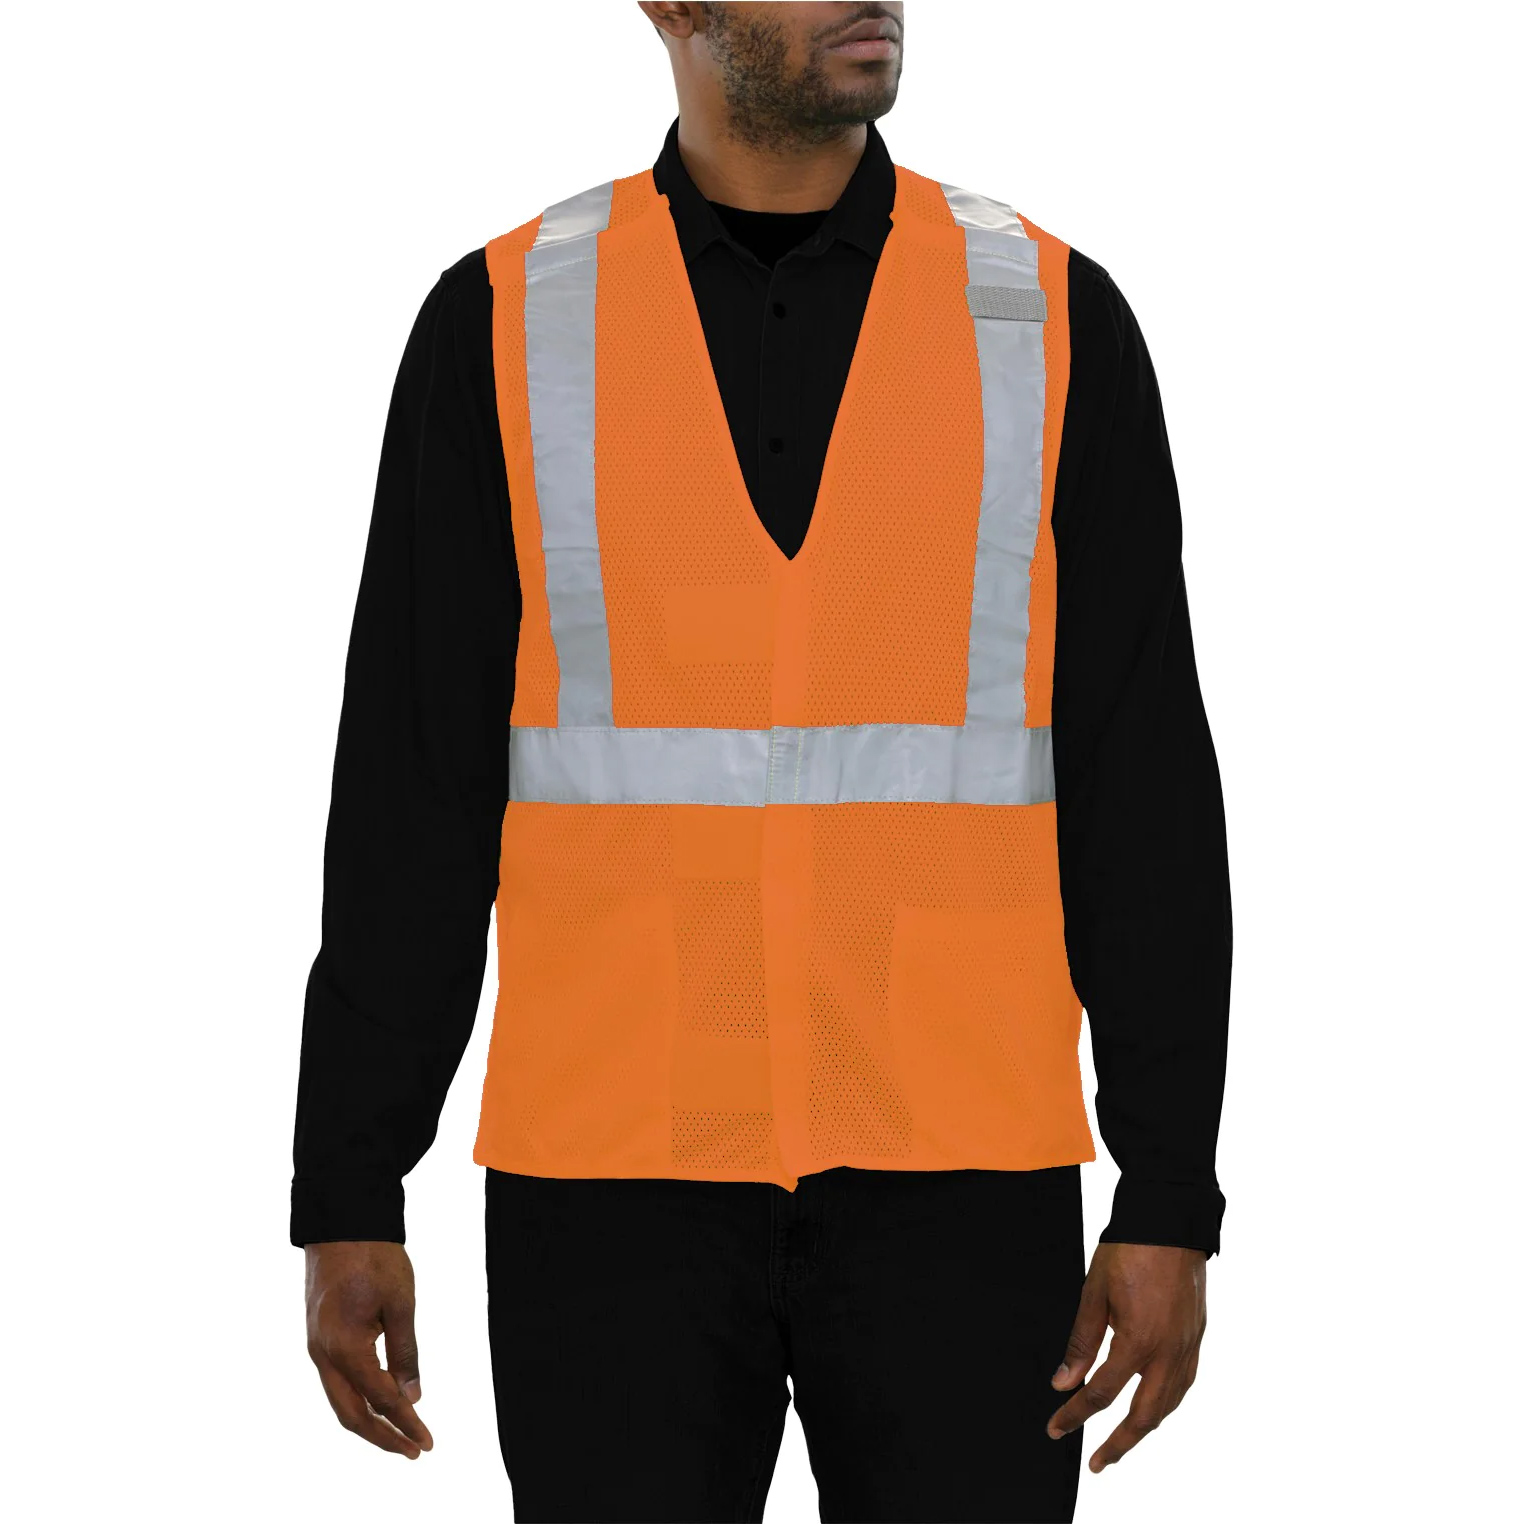 Reflective Apparel Type R Class 2 Breakaway X-Back Safety Vest - Orange - Large - 502SX-OR